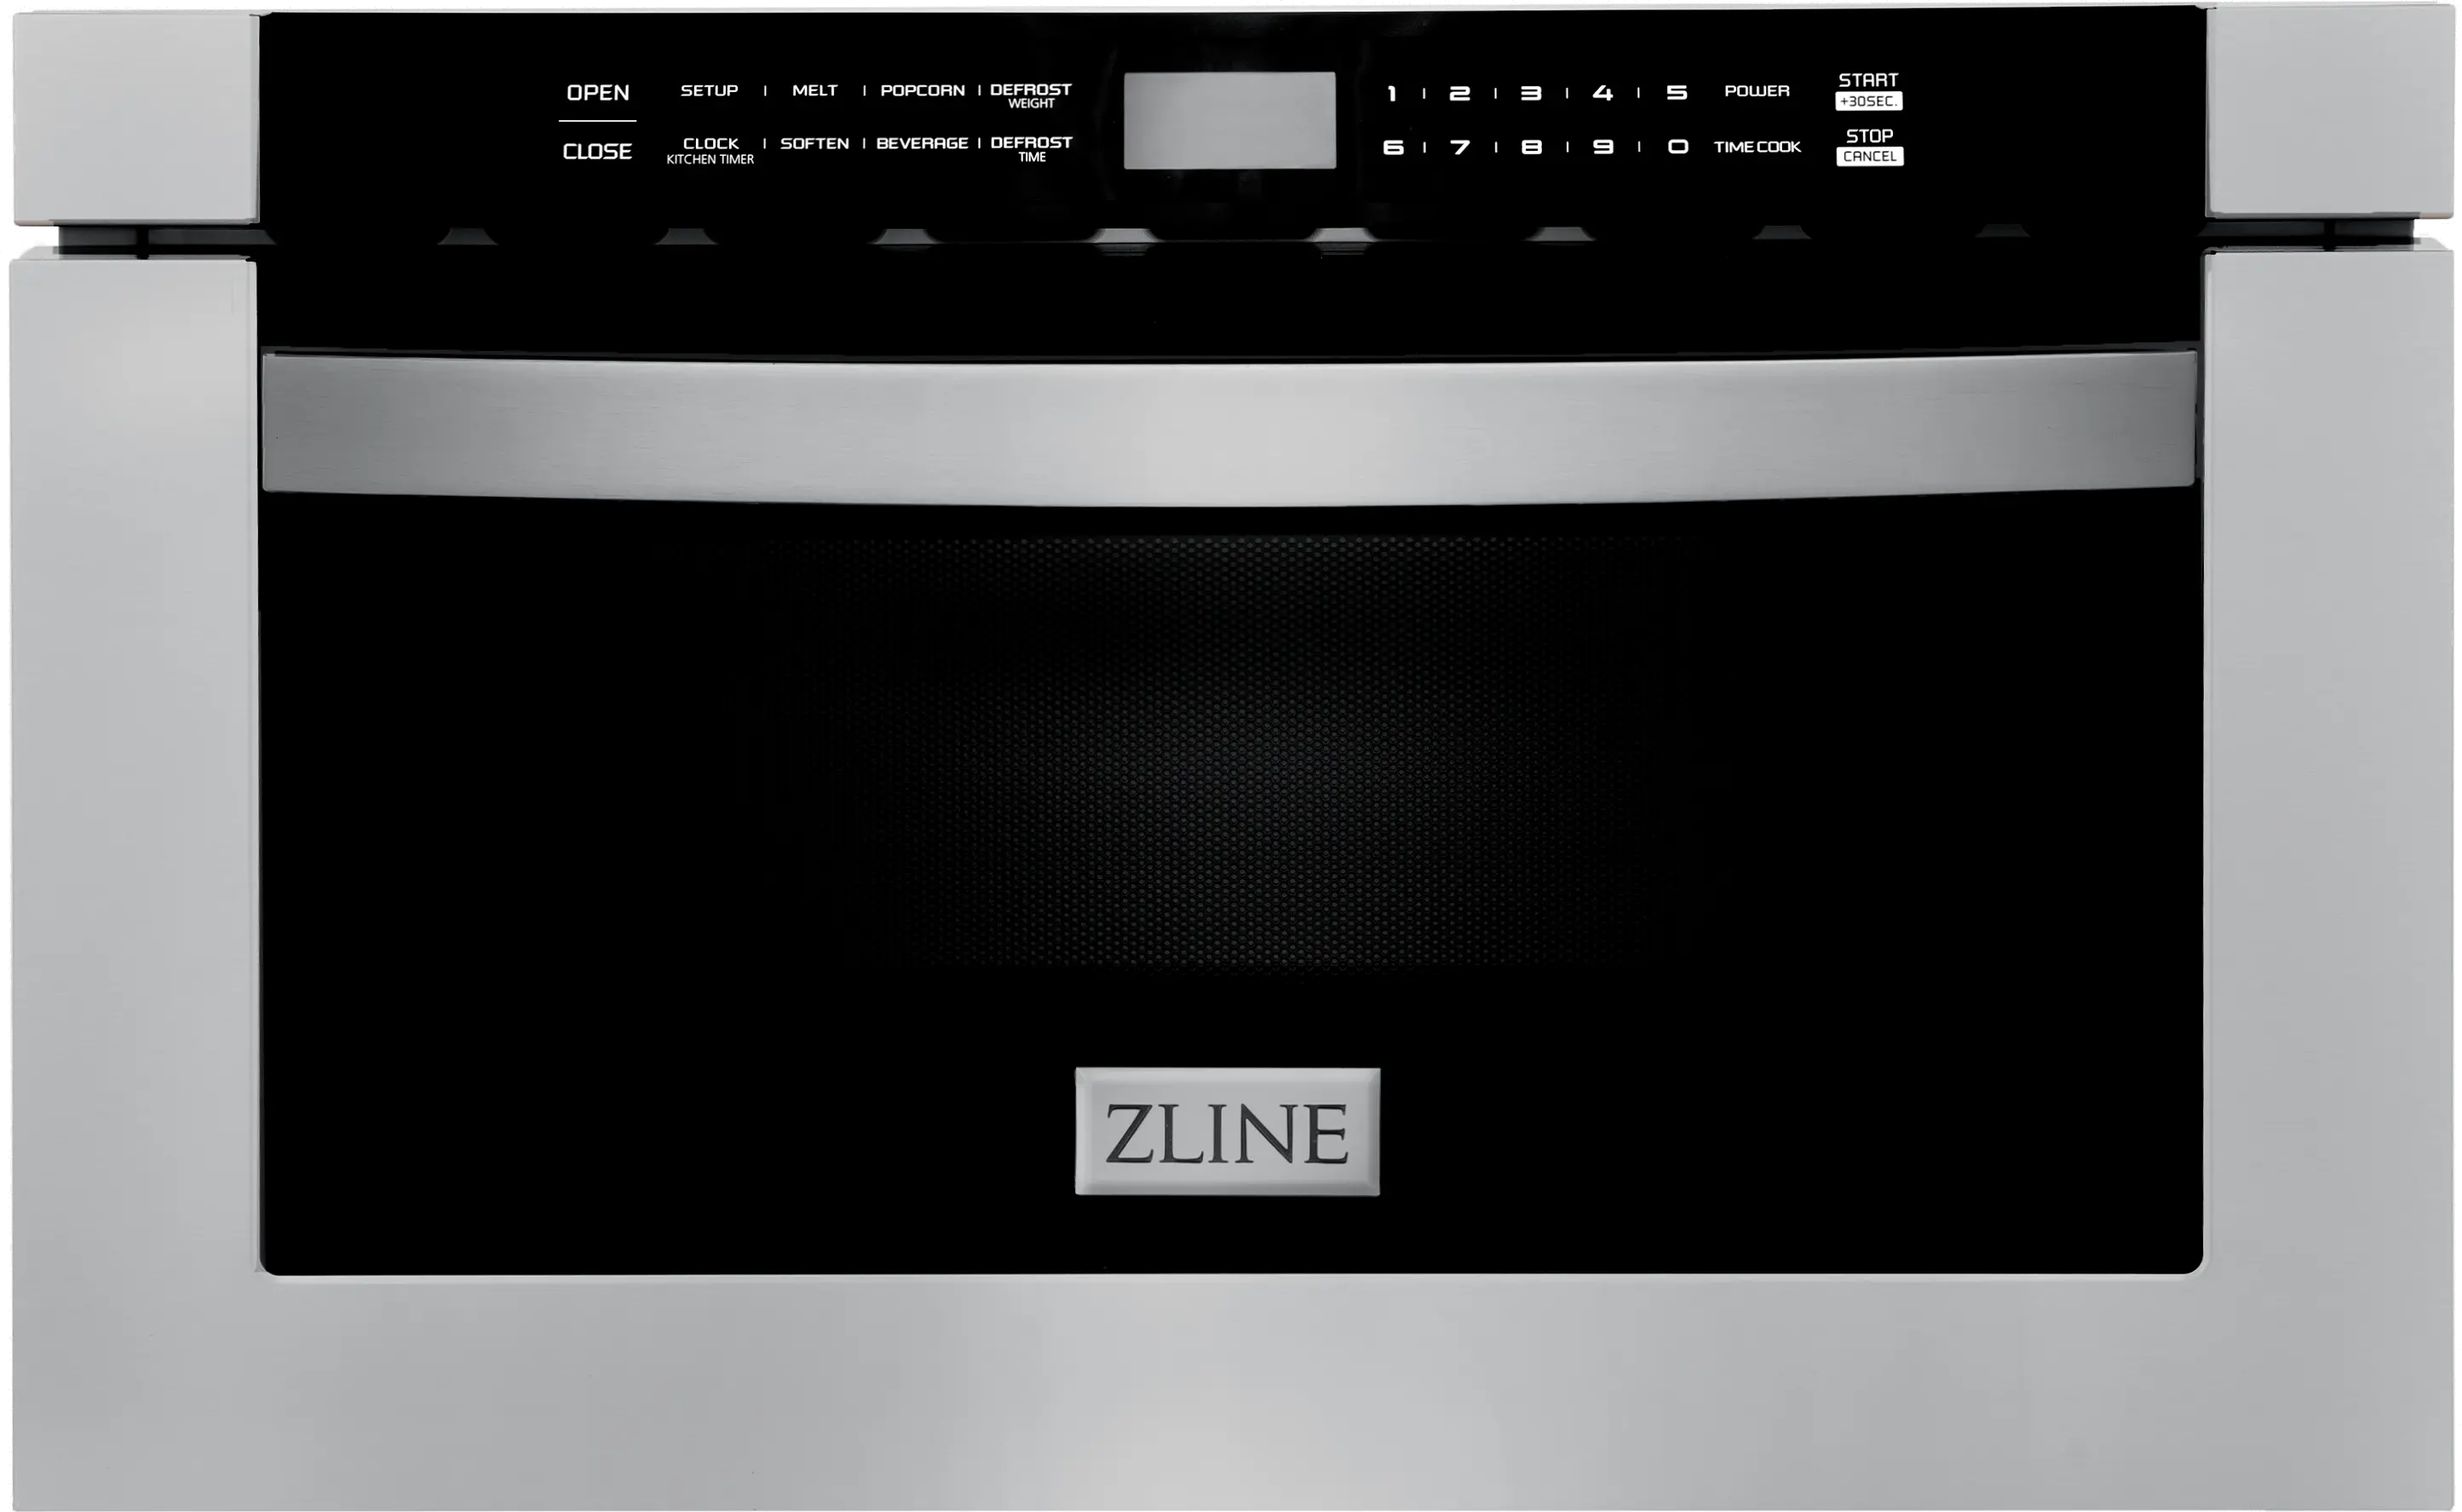 ZLINE MWD-1 24 1.2 Cu. ft. Microwave Drawer in Stainless Steel